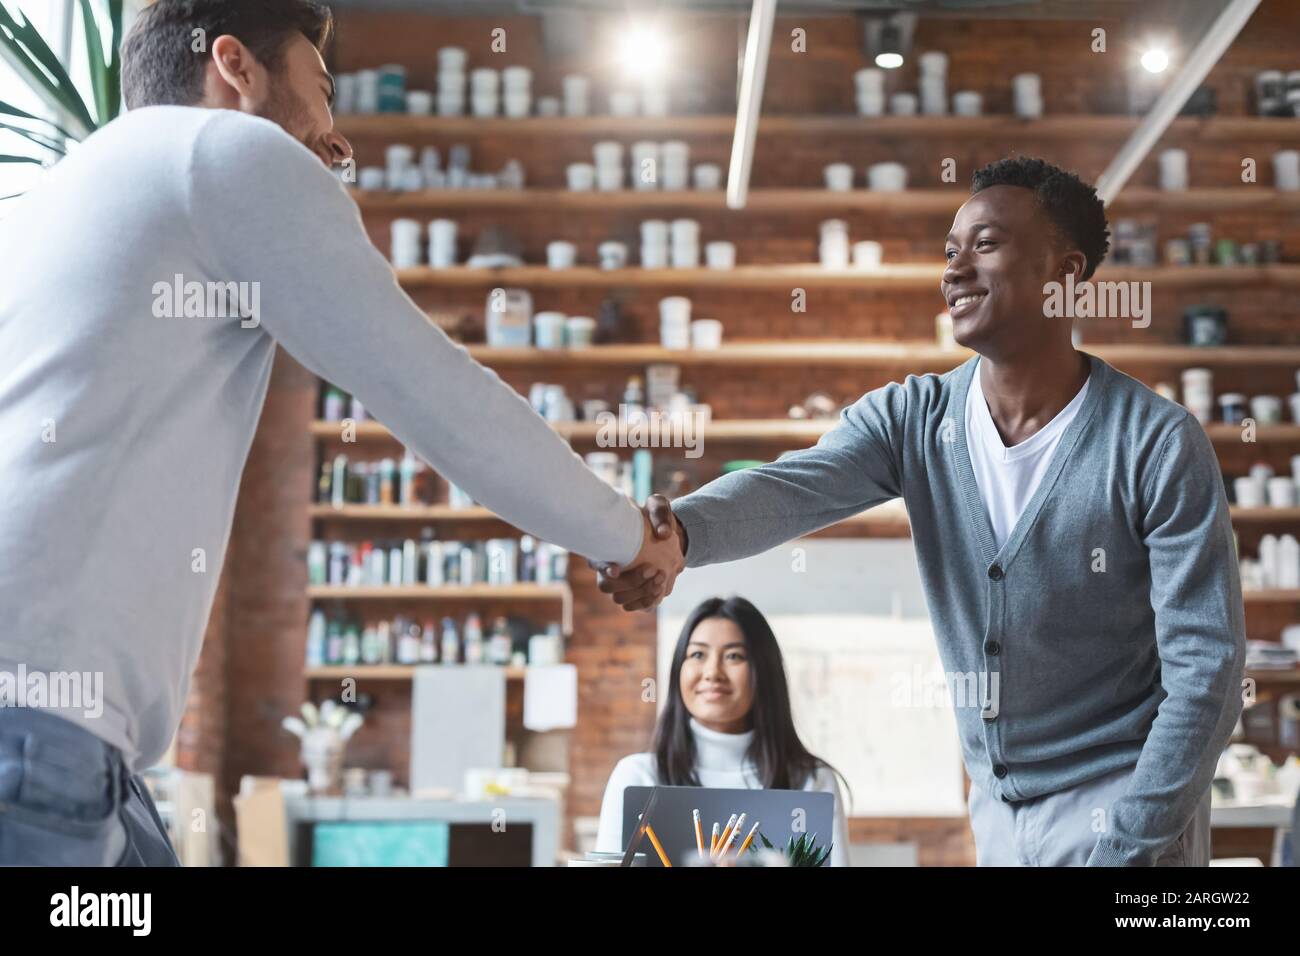 Young business partners shaking hands during group meeting Stock Photo